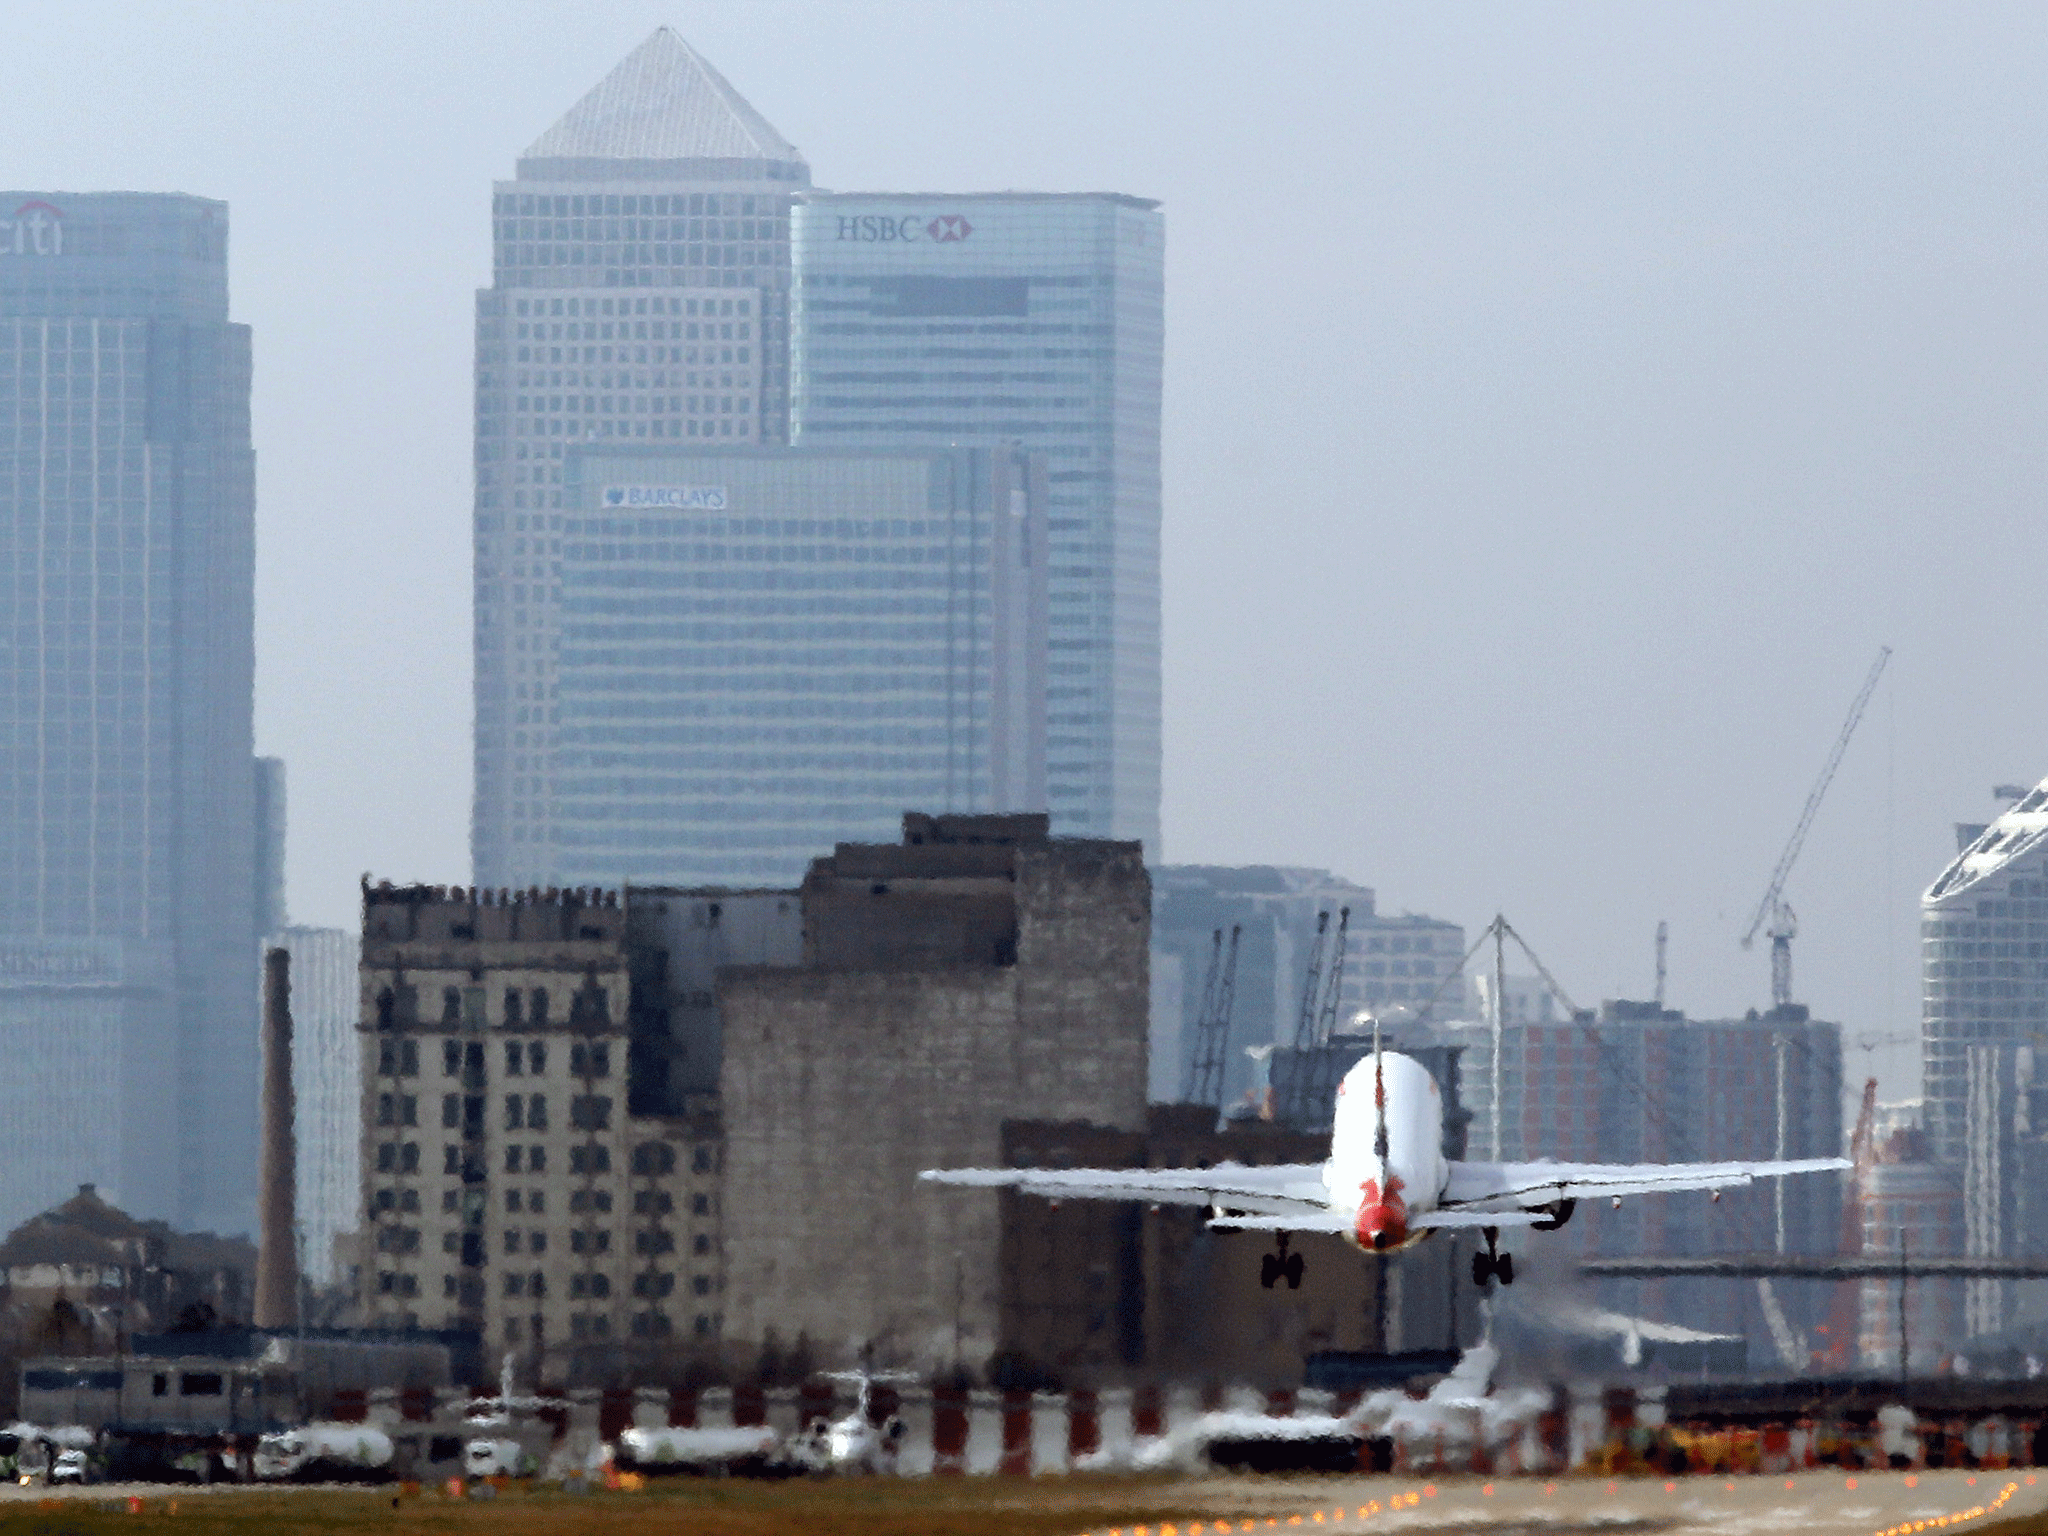 Passengers currently pay a £19 fee to the airport on every flight